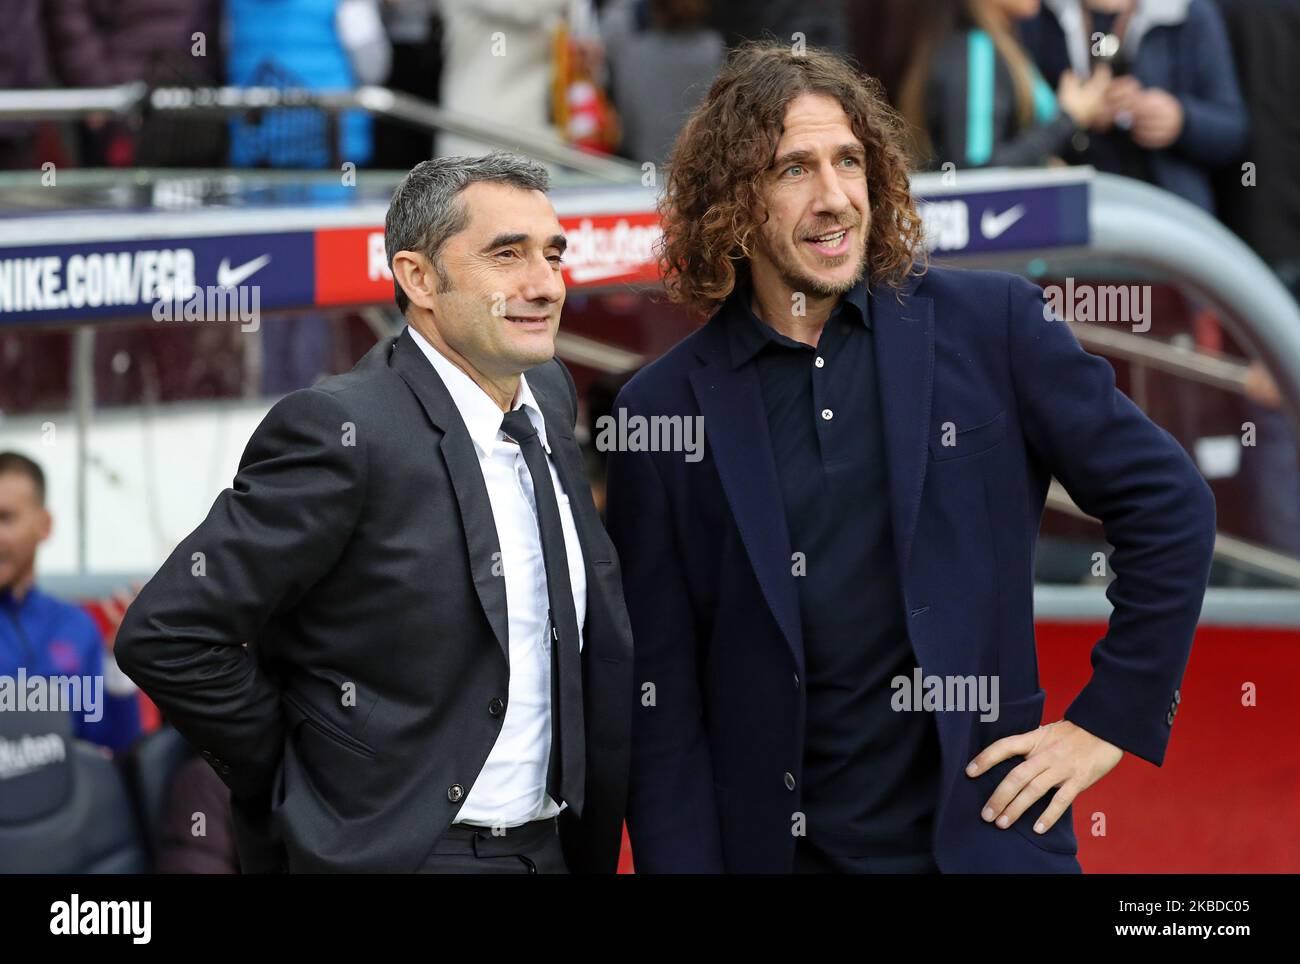 Ernesto Valverde and Carles Puyol during the match between FC Barcelona and Deportivo Alaves, corresponding to the week 18 of the Liga Santander, played at the Camp Nou Stadium, on 21th December 2019, in Barcelona, Spain. -- (Photo by Urbanandsport/NurPhoto) Stock Photo